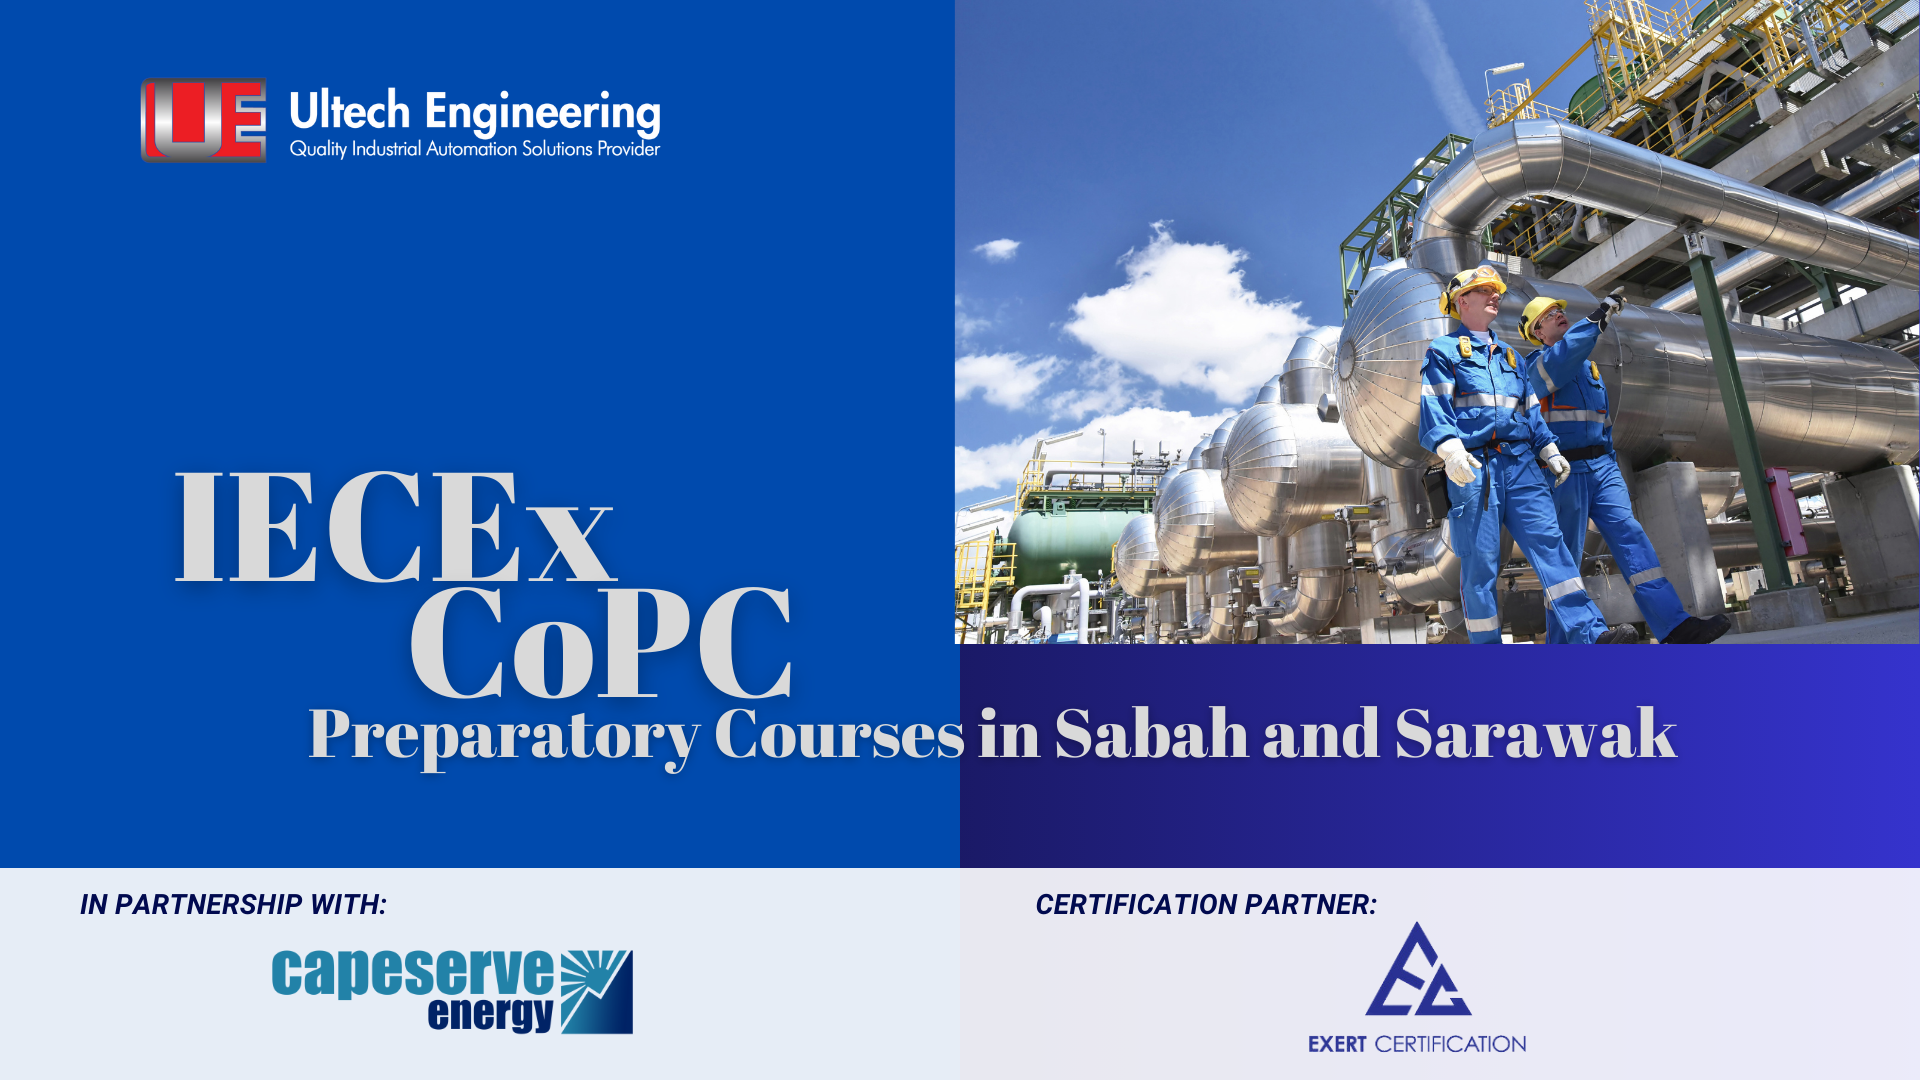 Ultech Engineering Announces Partnership with Capeserve Energy for IECEx CoPC Preparatory Courses in Sabah and Sarawak